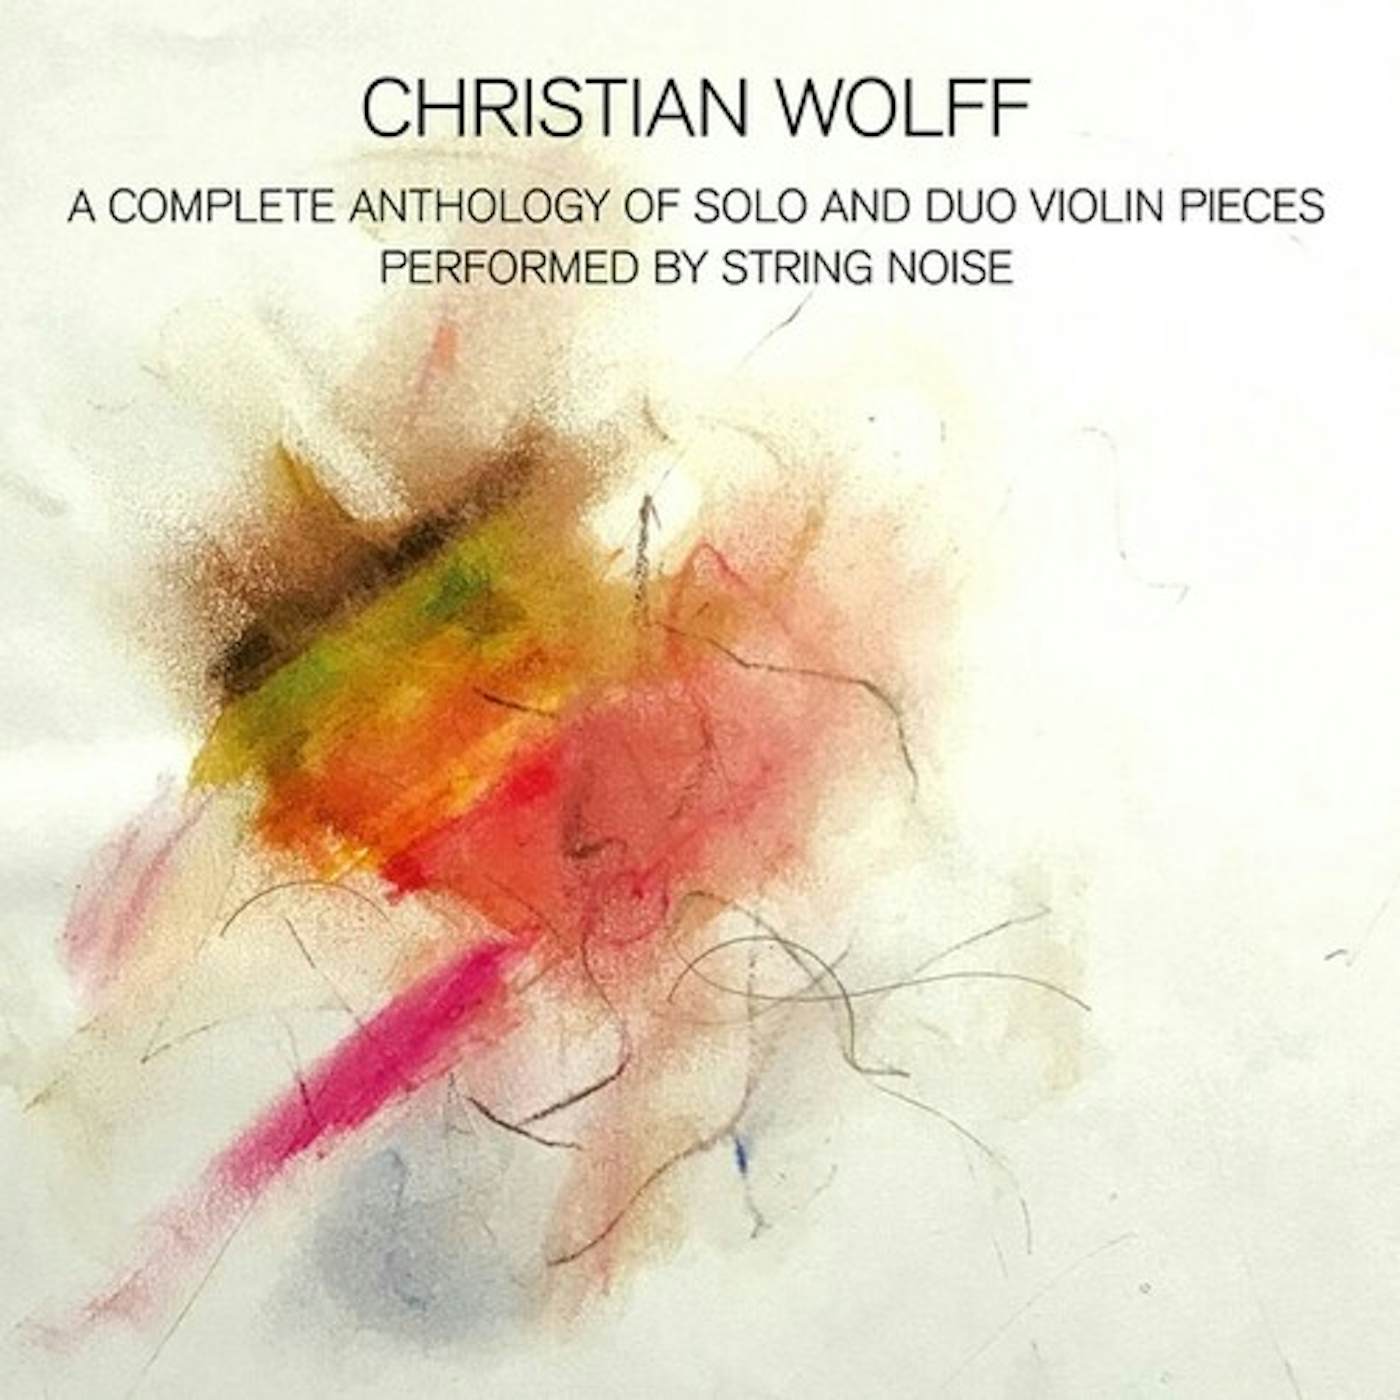 Christian Wolff COMPLETE ANTHOLOGY OF SOLO AND DUO VIOLIN PIECES CD